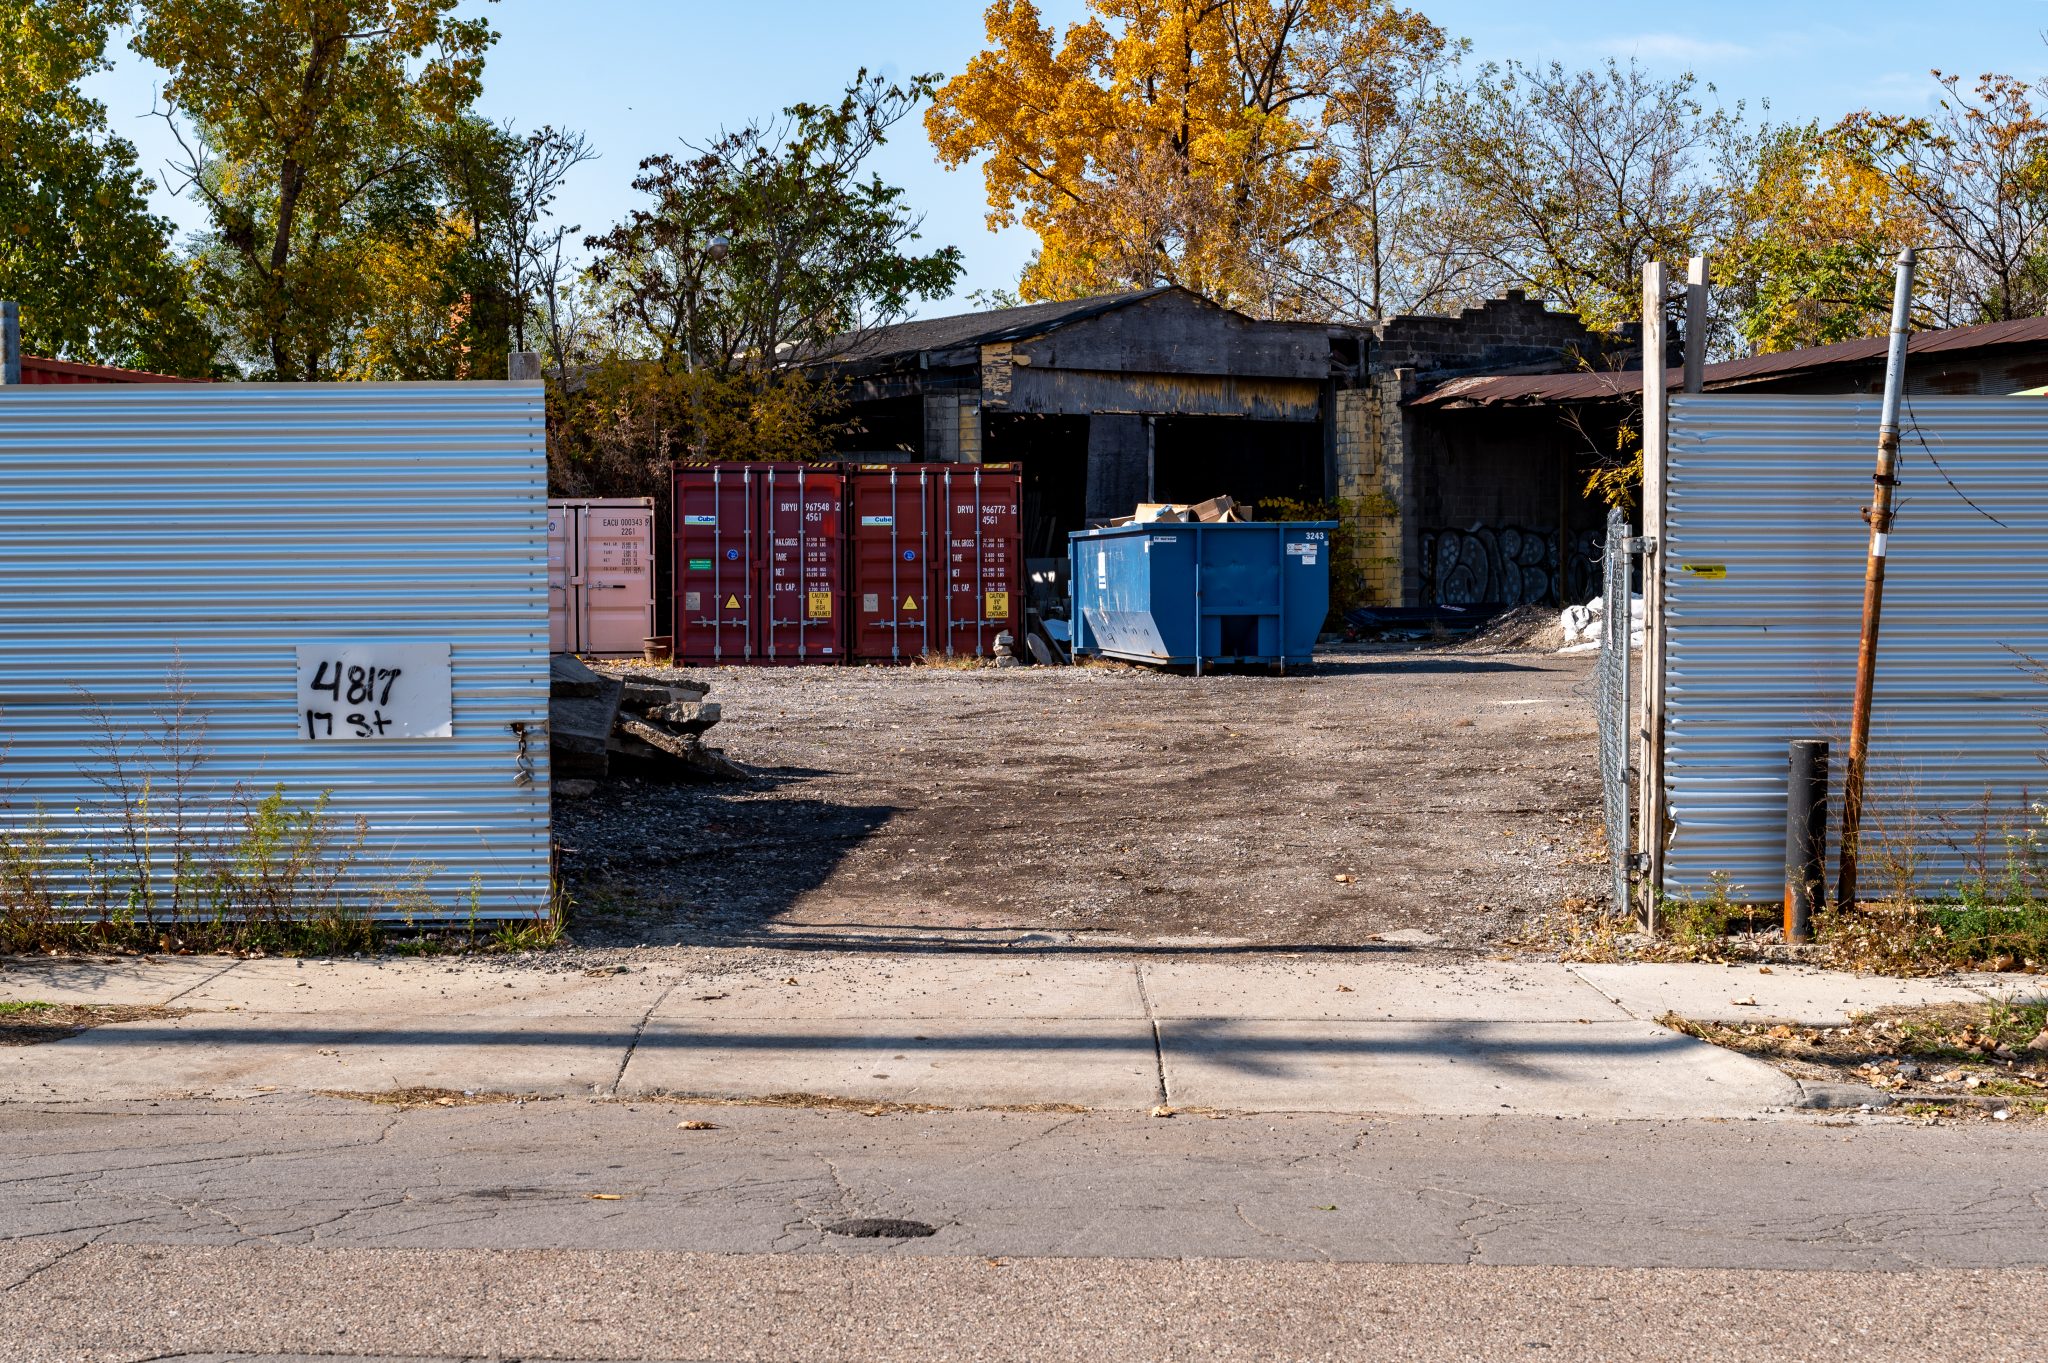 The property at 4817 17th St. in Detroit's Core City neighborhood is one of several properties expected to be demolished by the city, despite future renovation plans laid out by property owners.